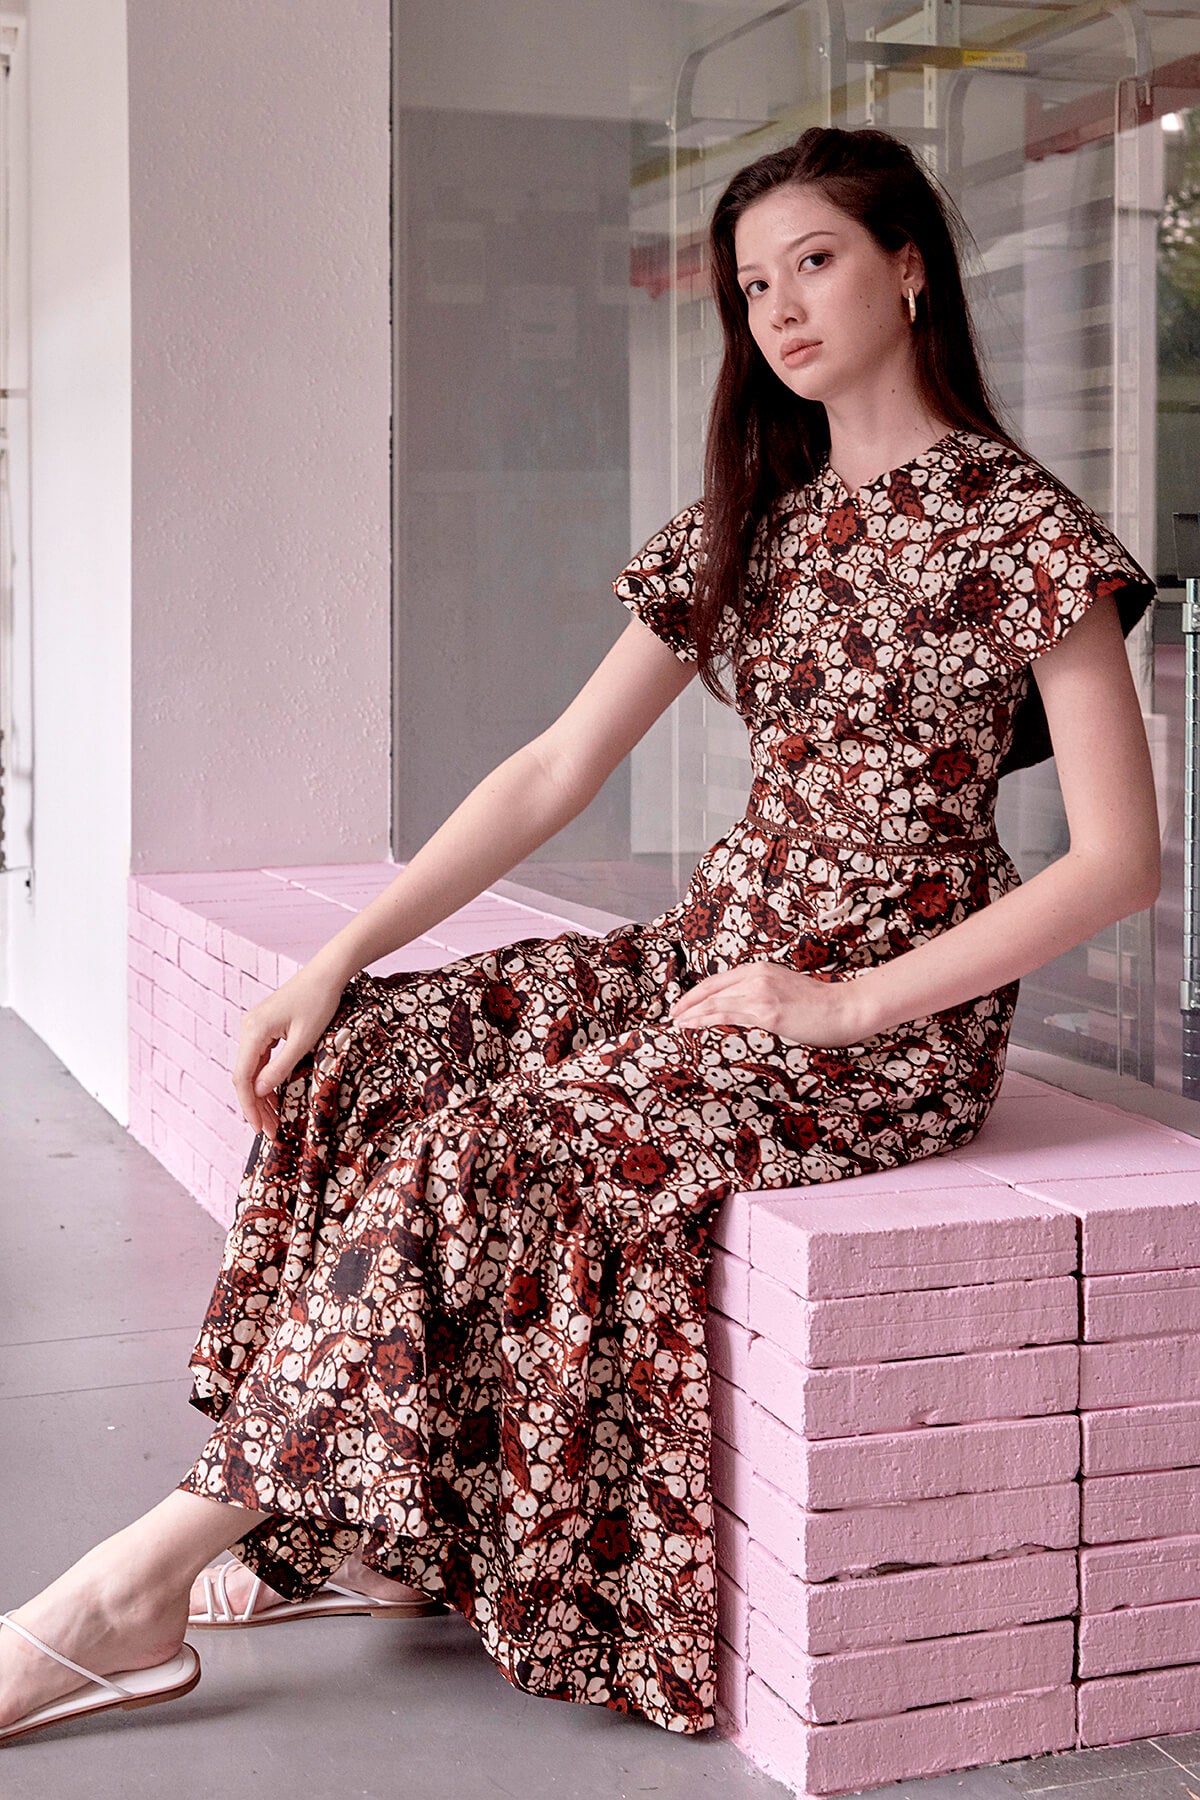 Singaporean female model seated in a brown batik long dress, looking into camera with long hair and gold earrings